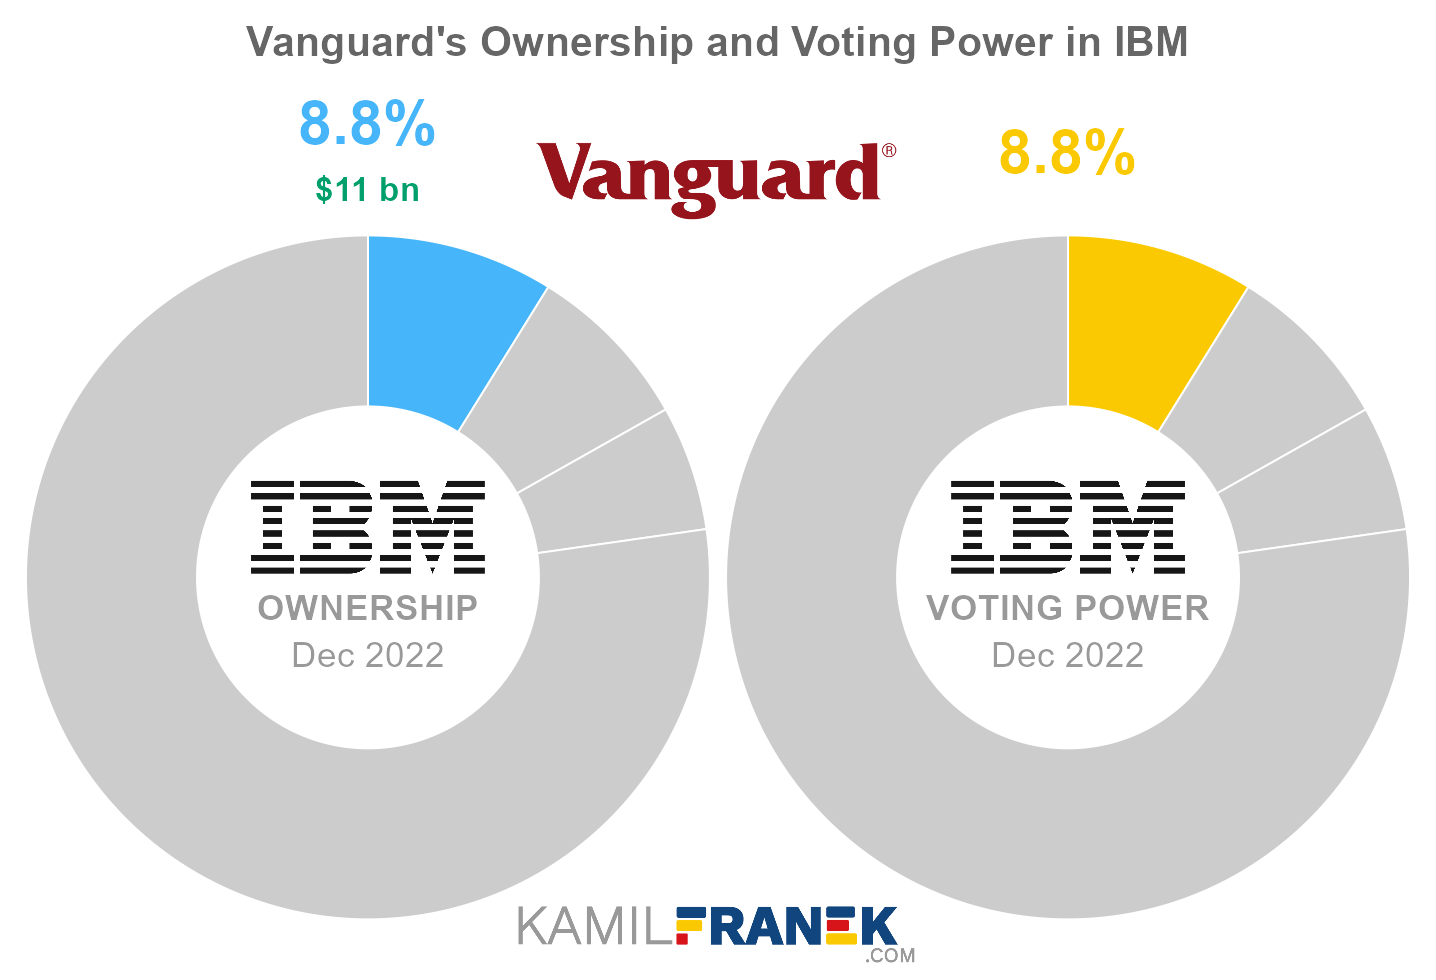 Vanguard's share ownership and voting power in IBM (chart)